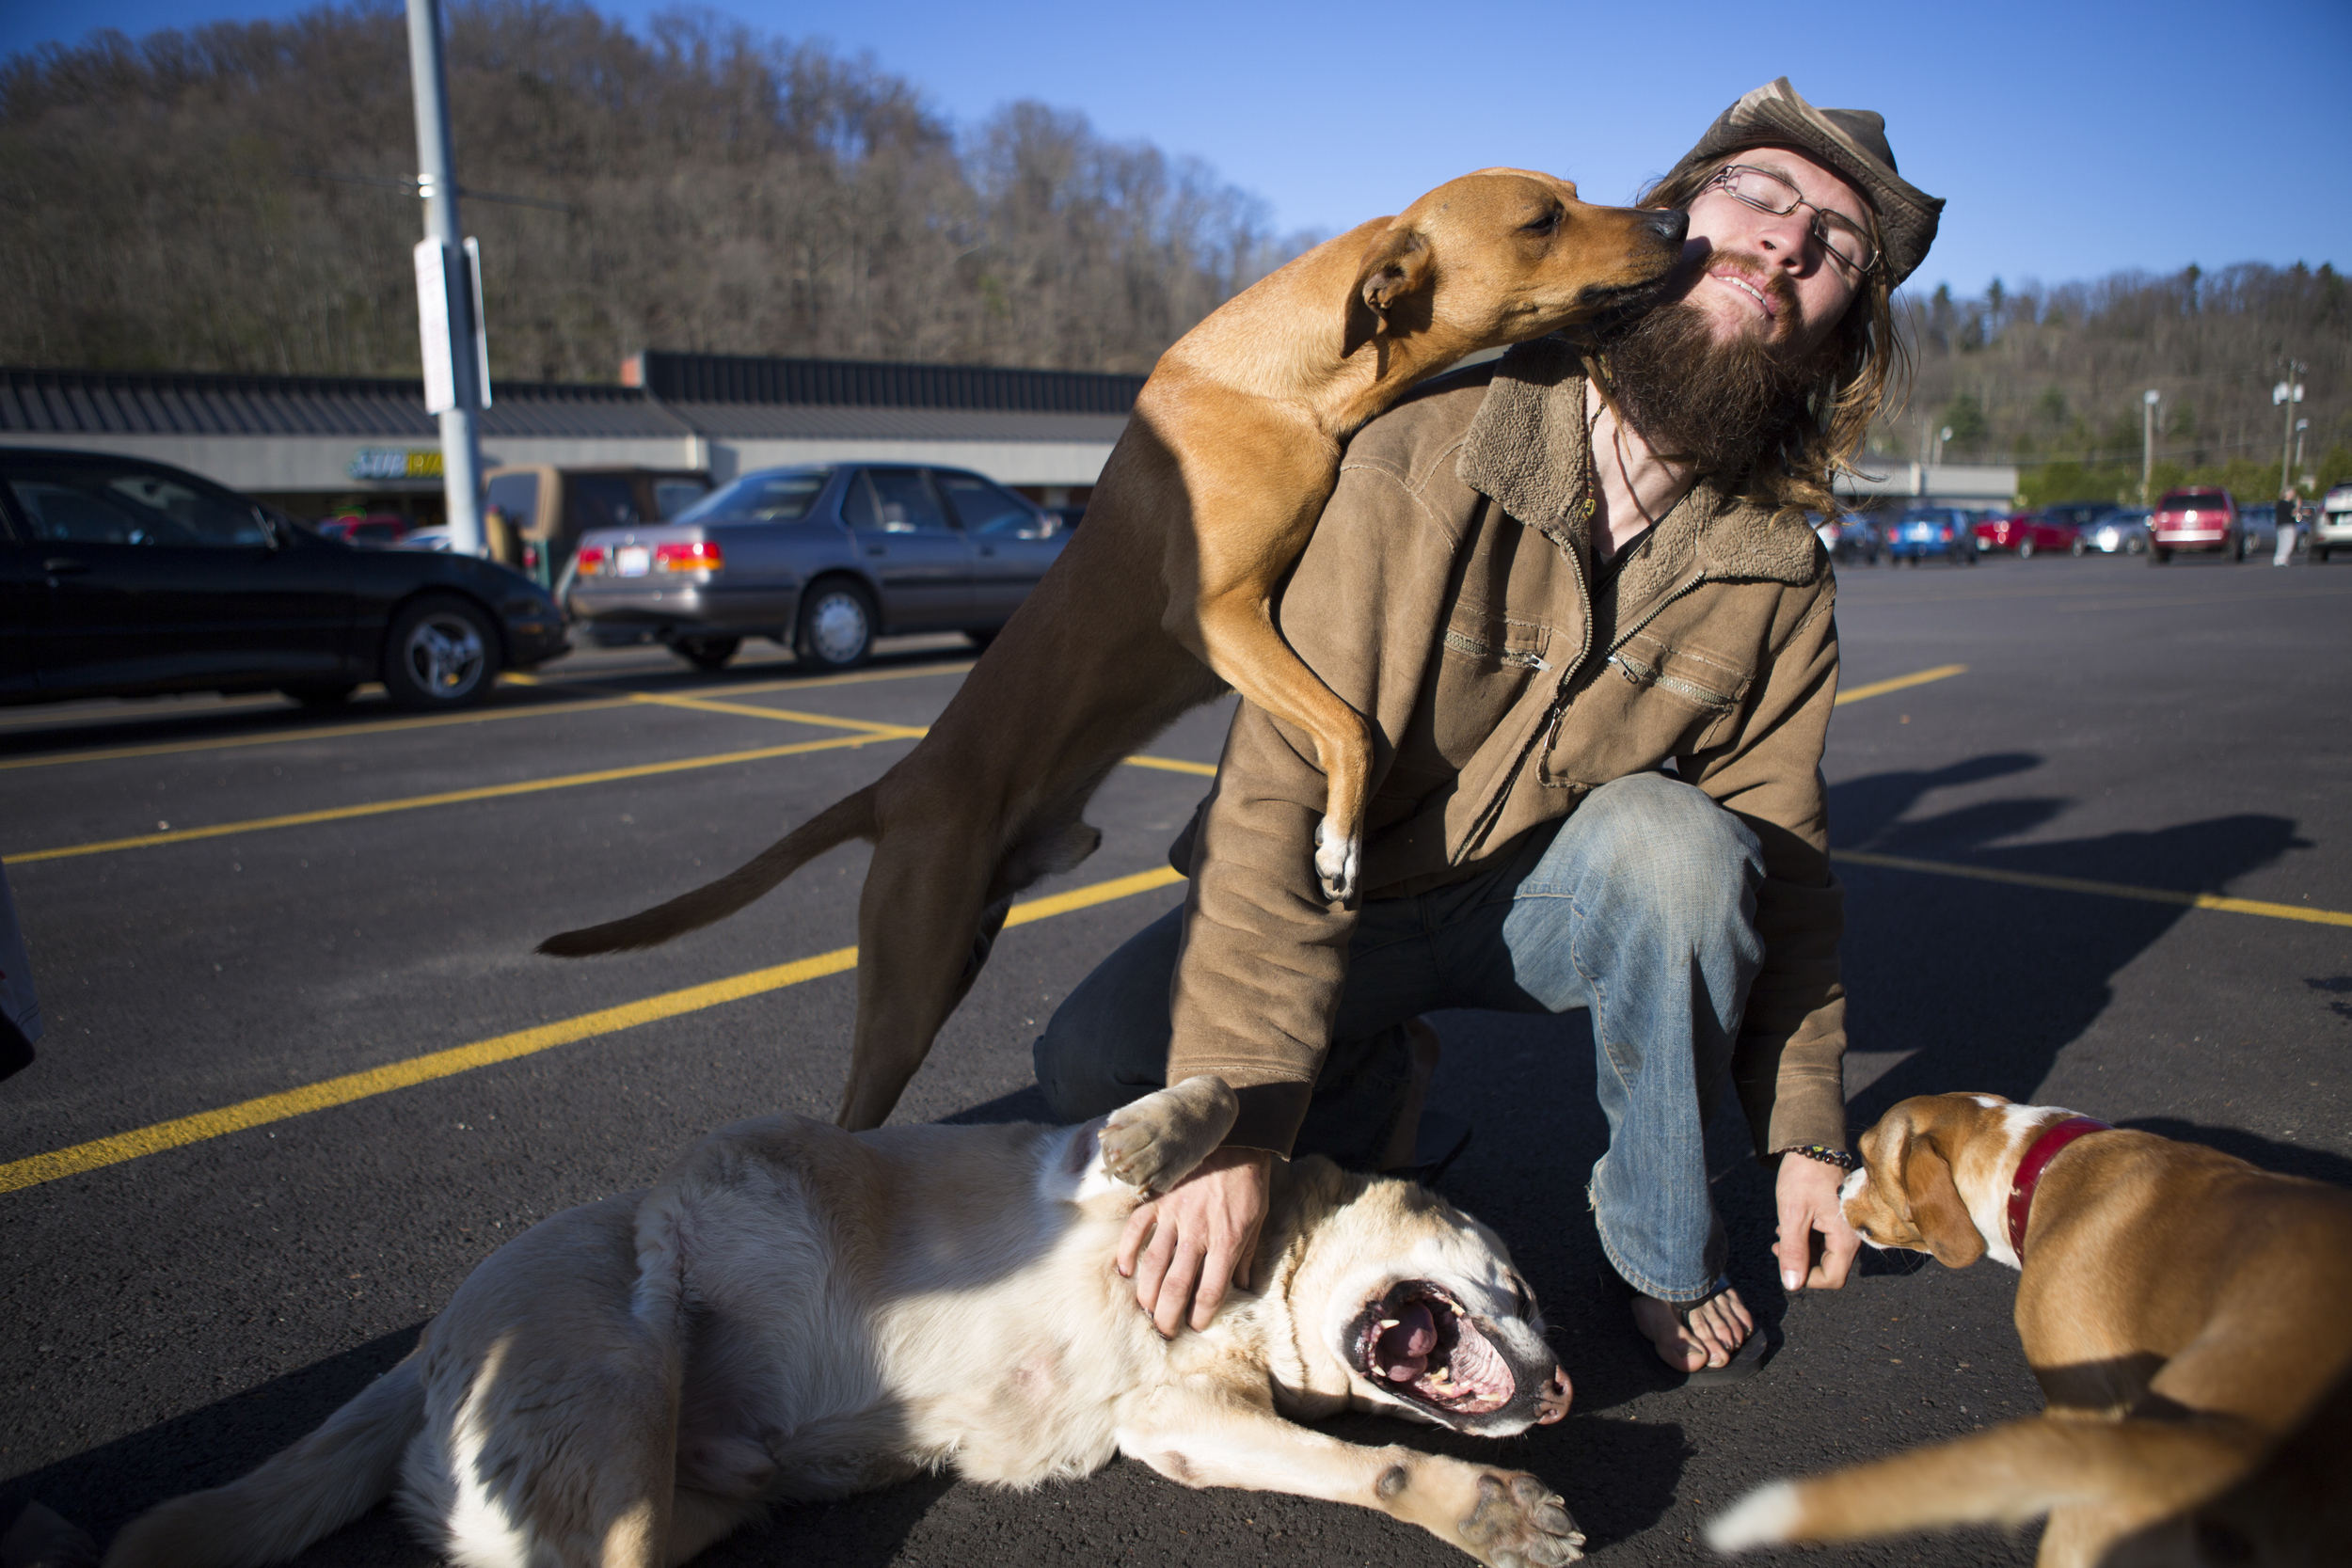  Amigo the dog licks Spiral's face as he returns to their van in a shopping center parking lot in Athens, Ohio. Spiral has permanent residence in California, but spends several months out of the year traveling to the east coast and then back to Calif